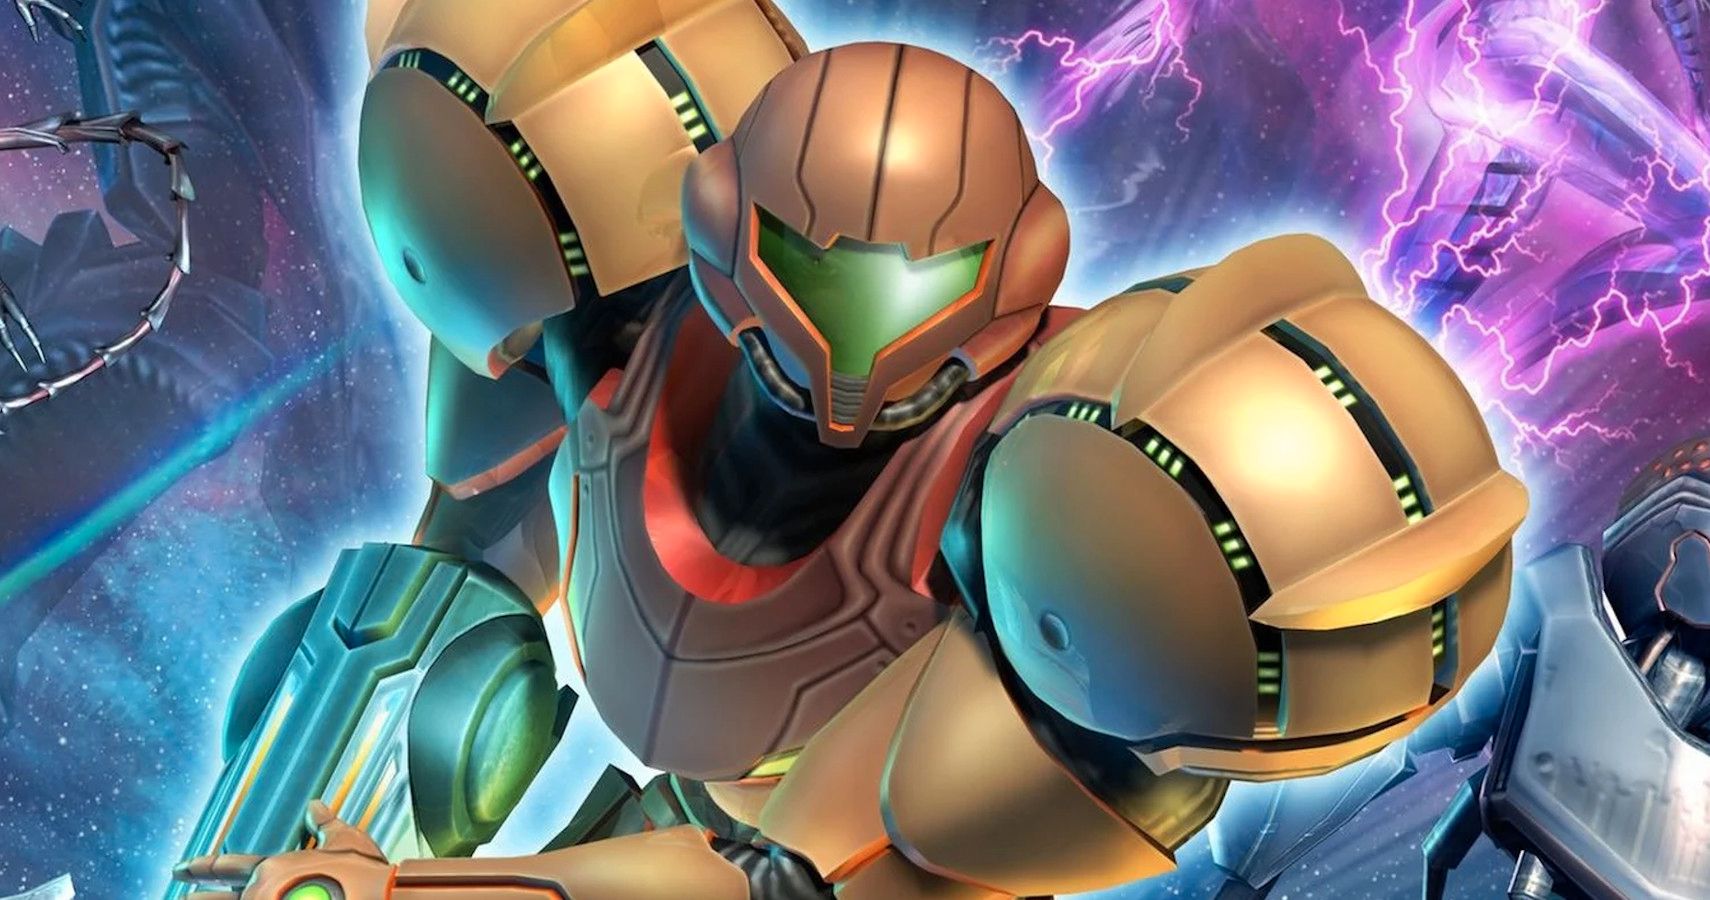 will there be a metroid game for switch